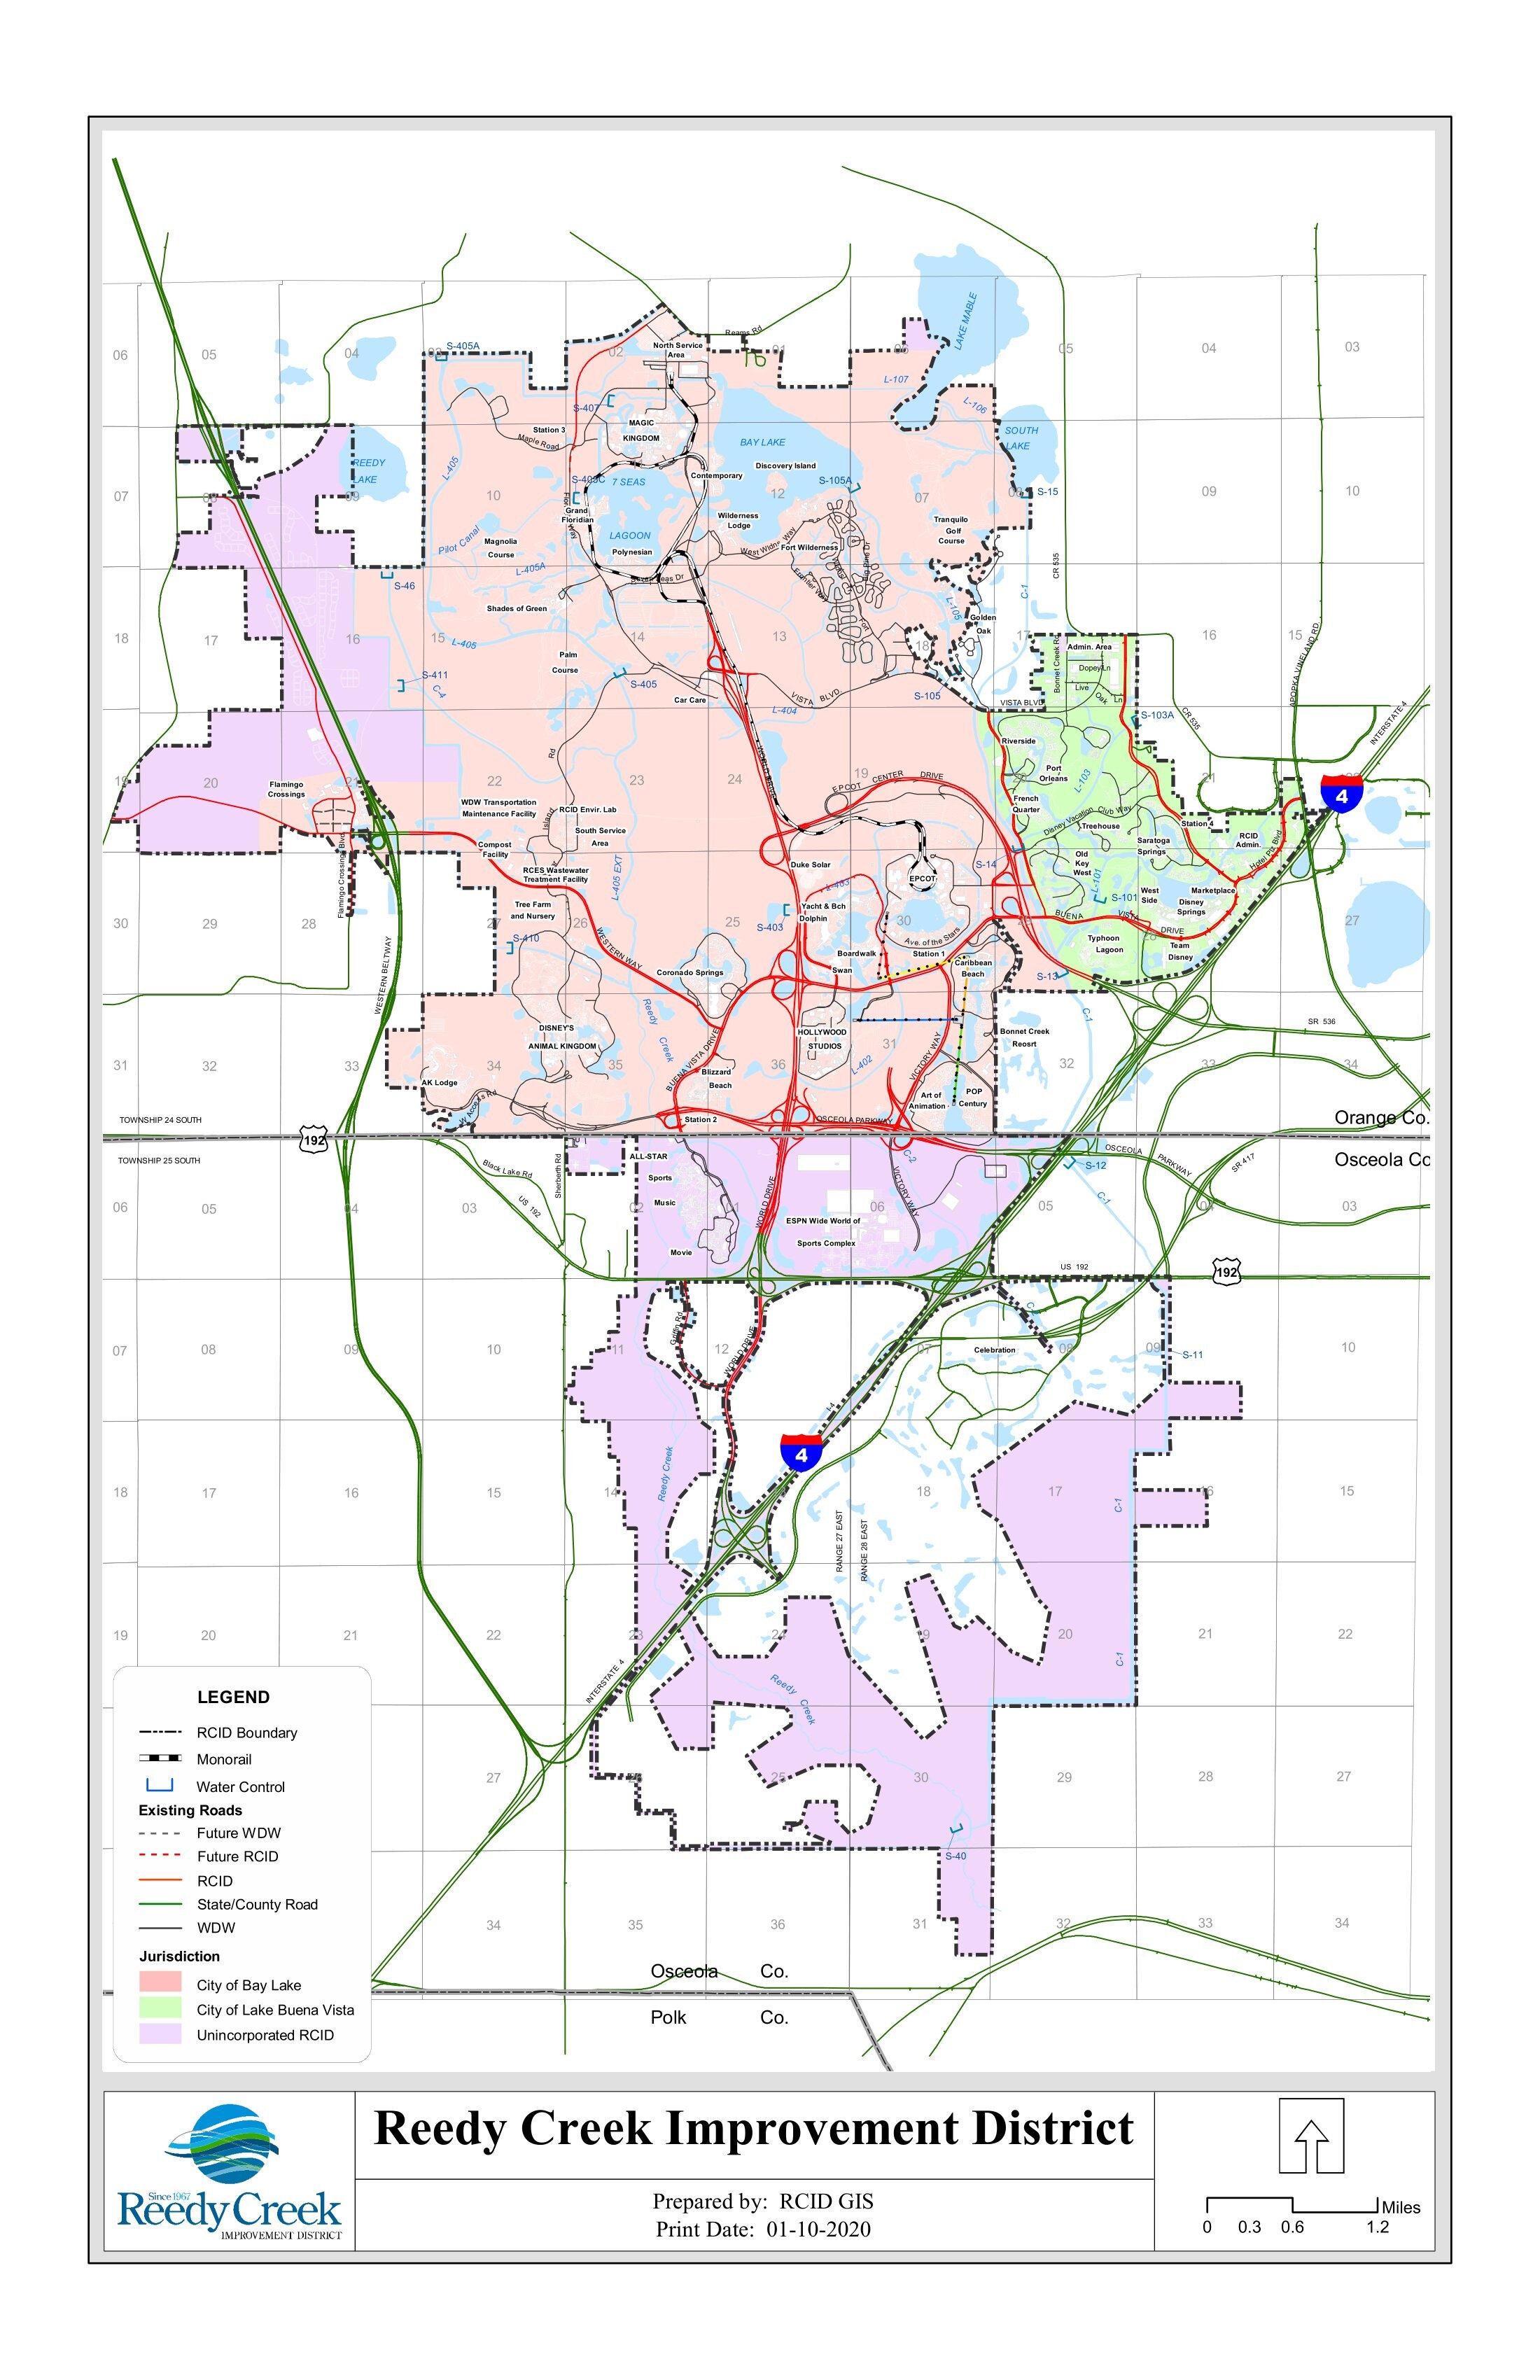 The Reedy Creek Improvement District covers over 25,000 acres of land surrounding Disneyworld and it's resorts.